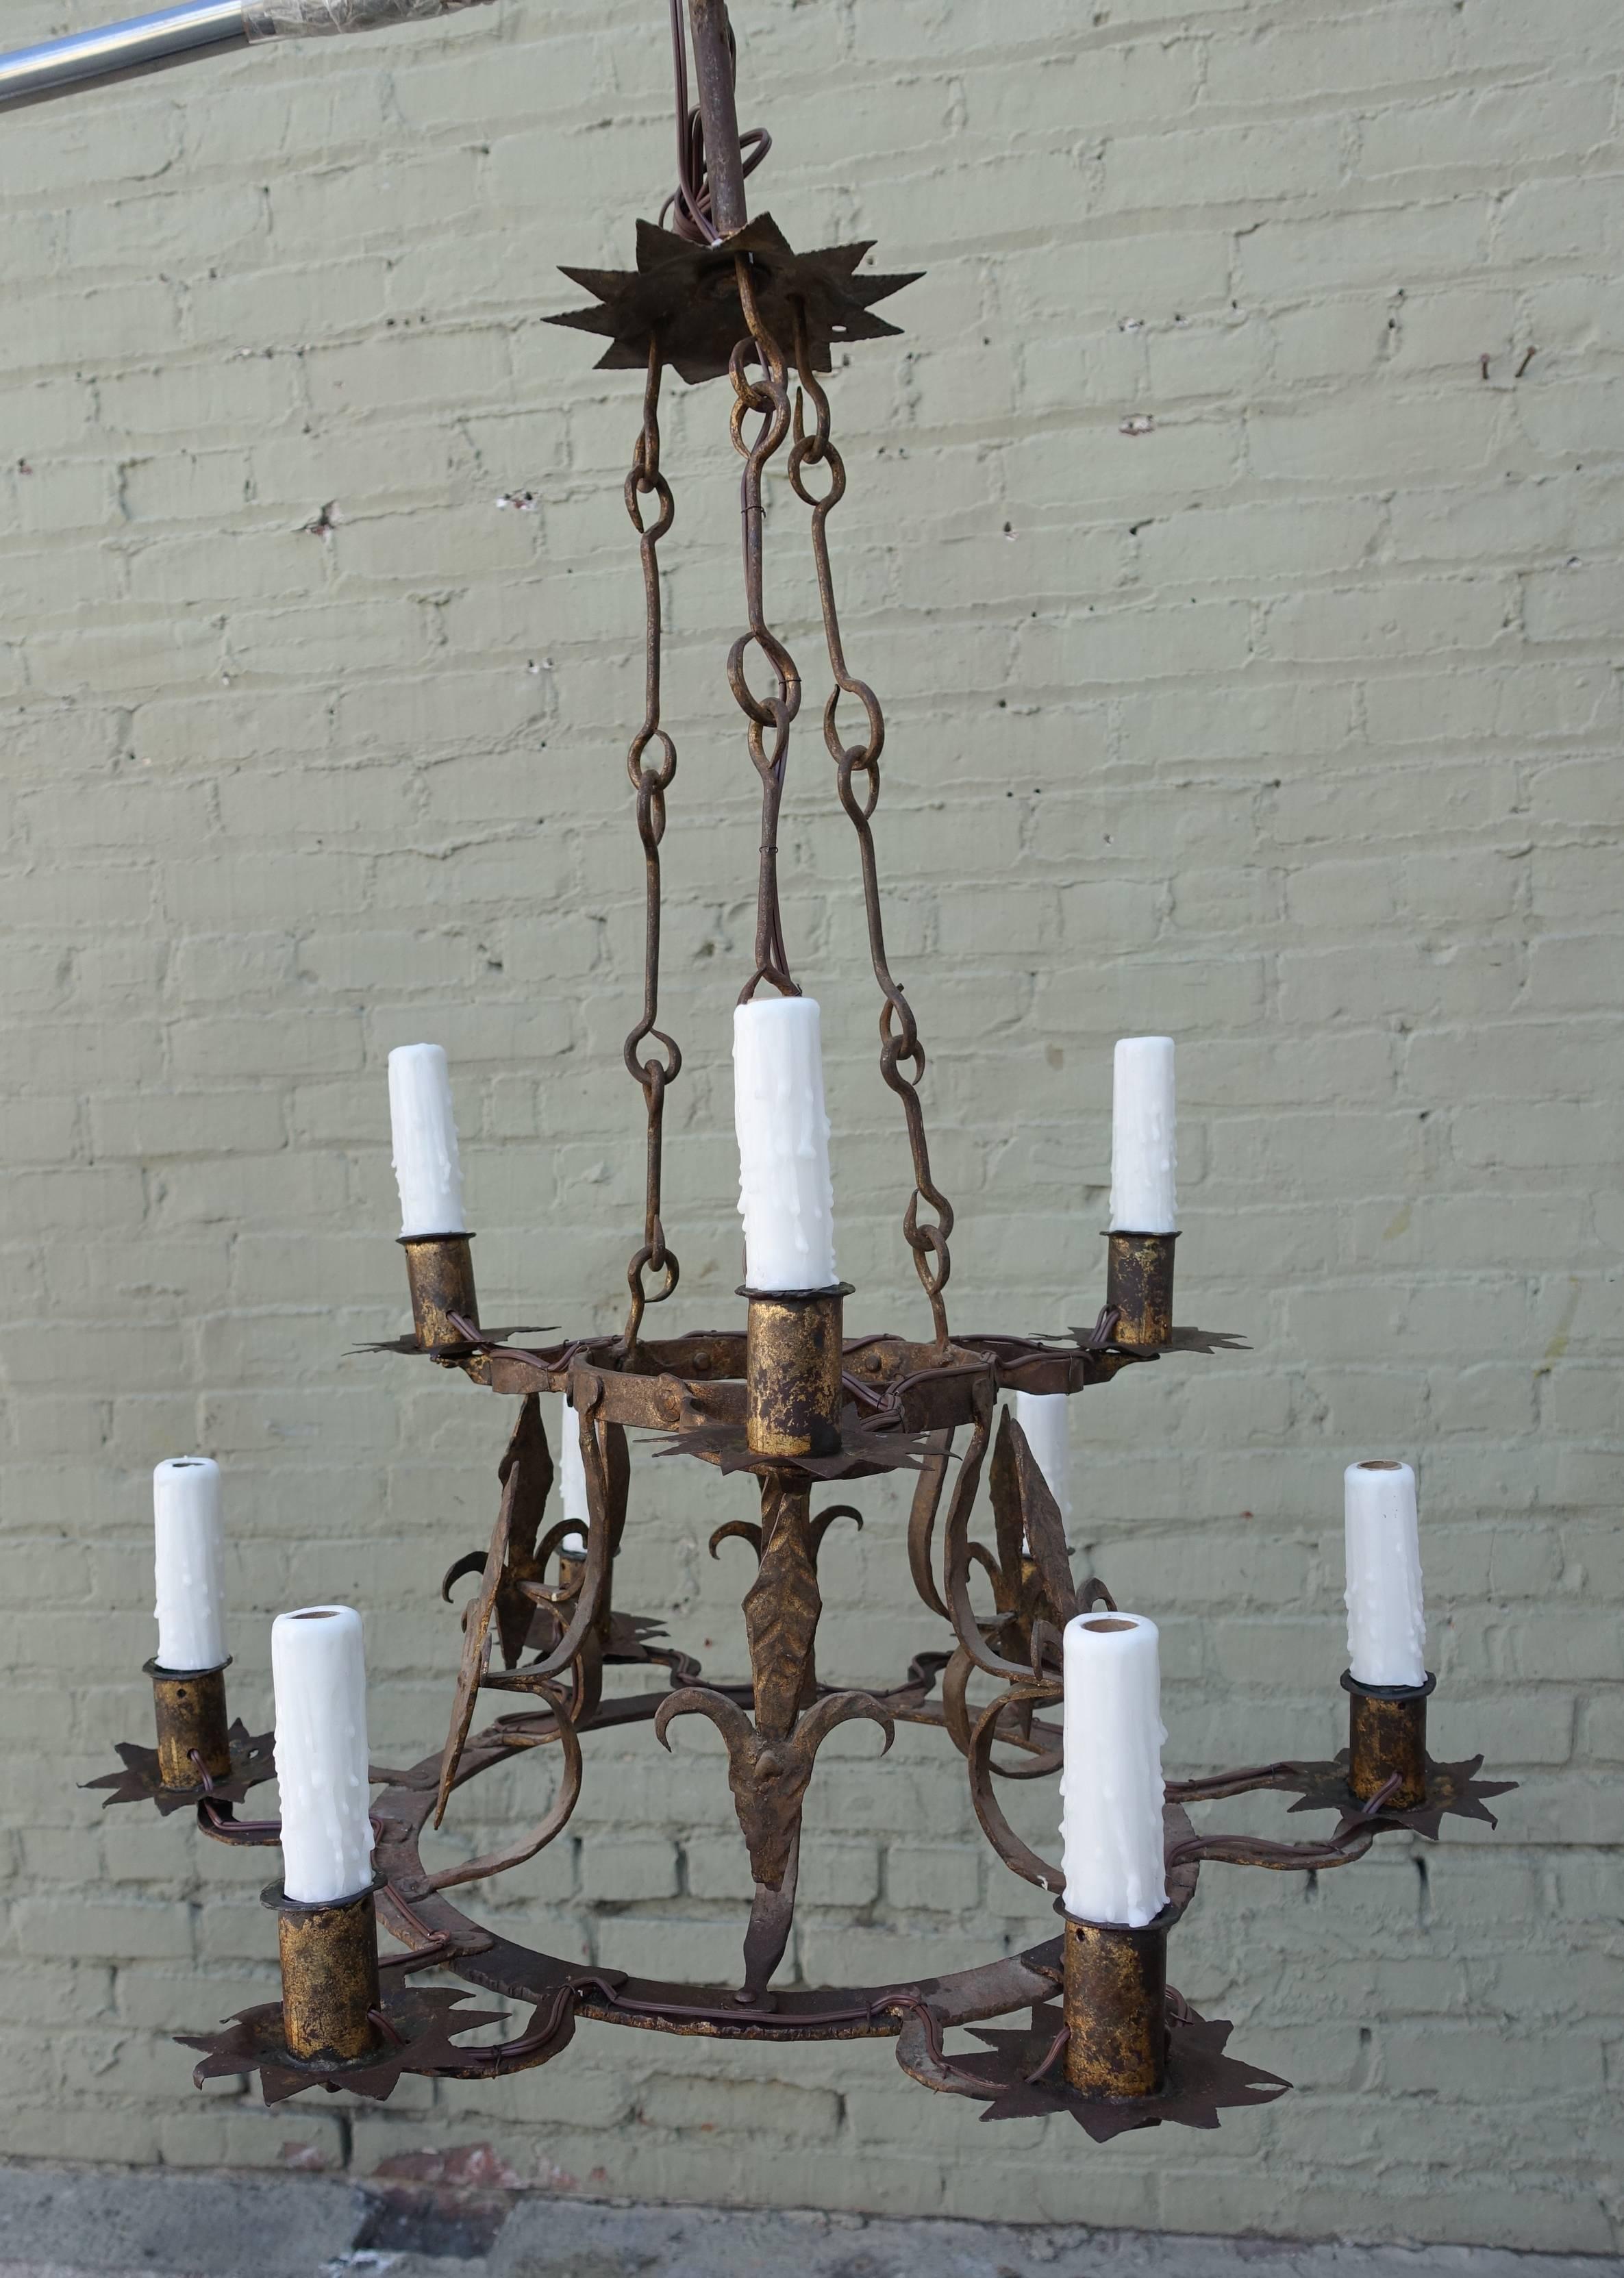 Spanish hand-wrought iron nine-light, two-tiered chandelier incorporating fleur-de-lys throughout. Newly wired with drip wax candle covers. Ready to install.